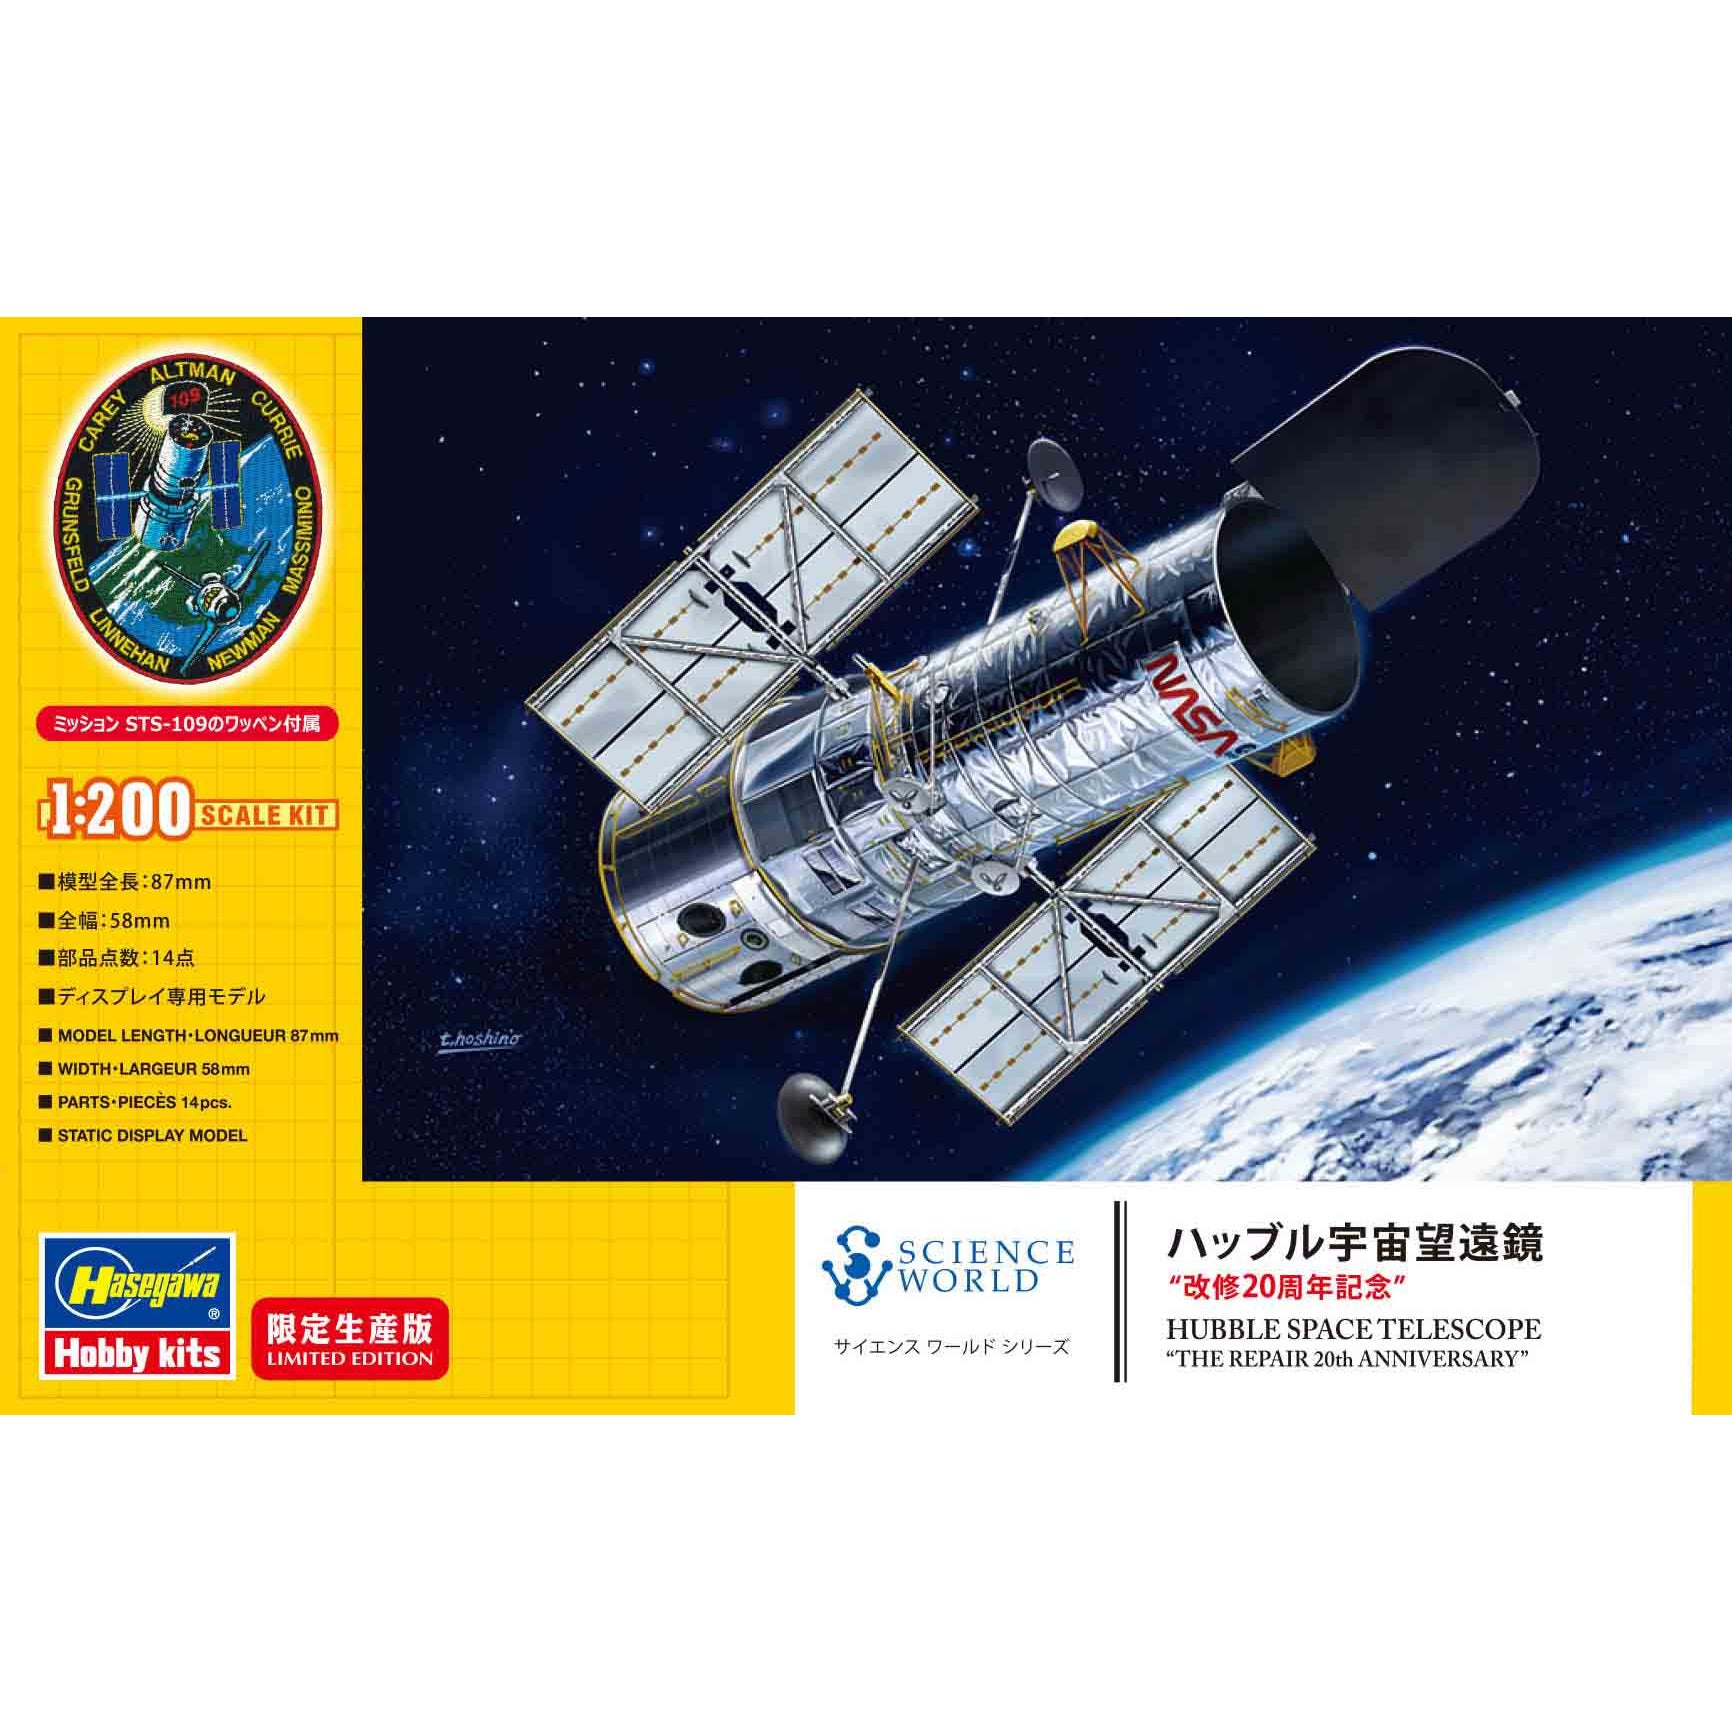 Hubble Space Telescope "The Repair 20th Anniversary" 1/200 #52326 by Hasegawa